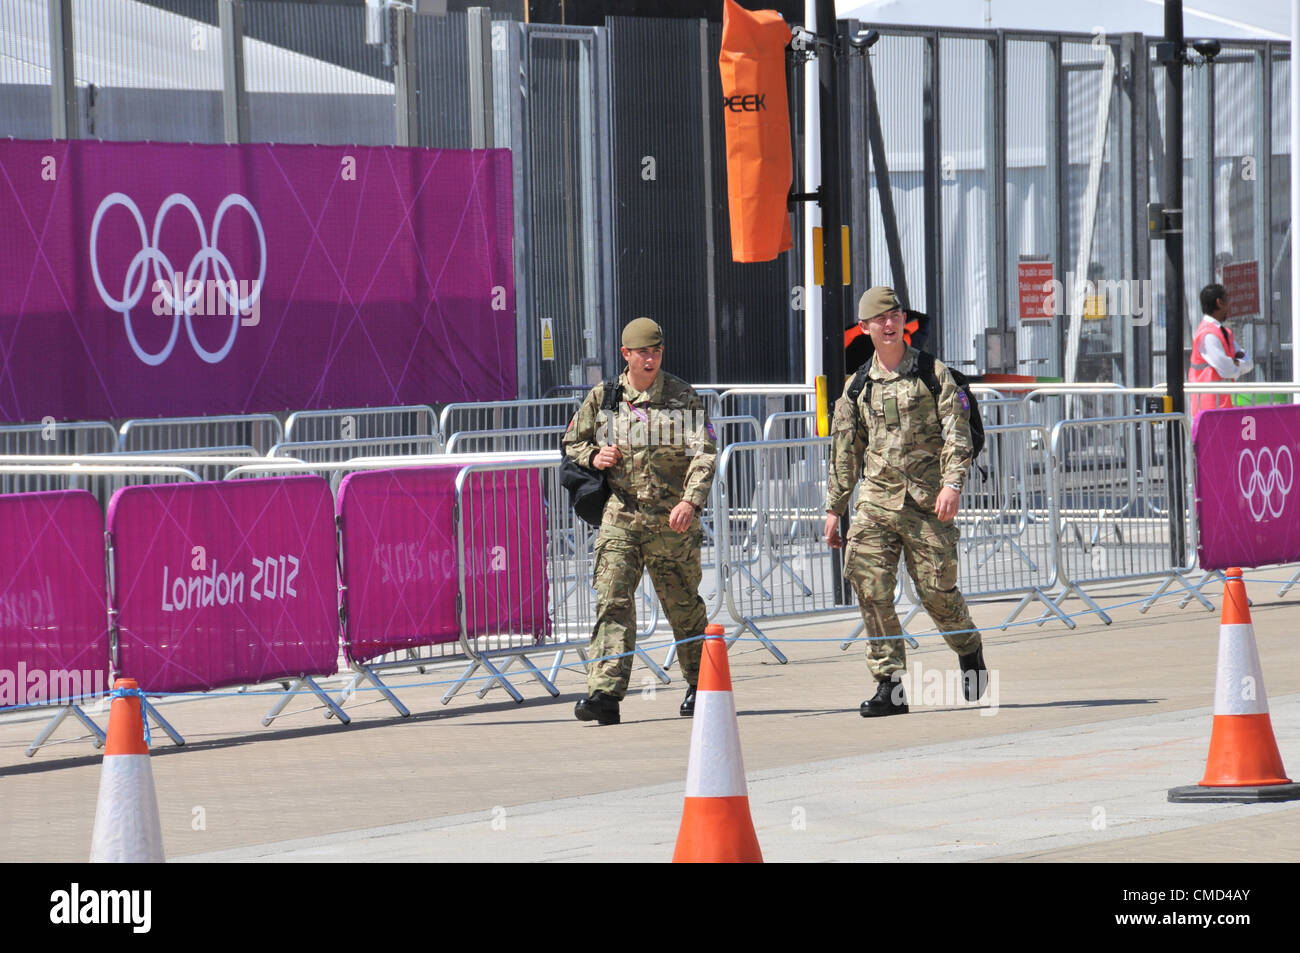 Stratford, London, UK. 22nd July 2012. The Olympic Park has the army acting as additional security due to the poor performance of G4S the private company that was supposed to supply staff for the games but has failed to do so. Credit:  Matthew Chattle / Alamy Live News Stock Photo